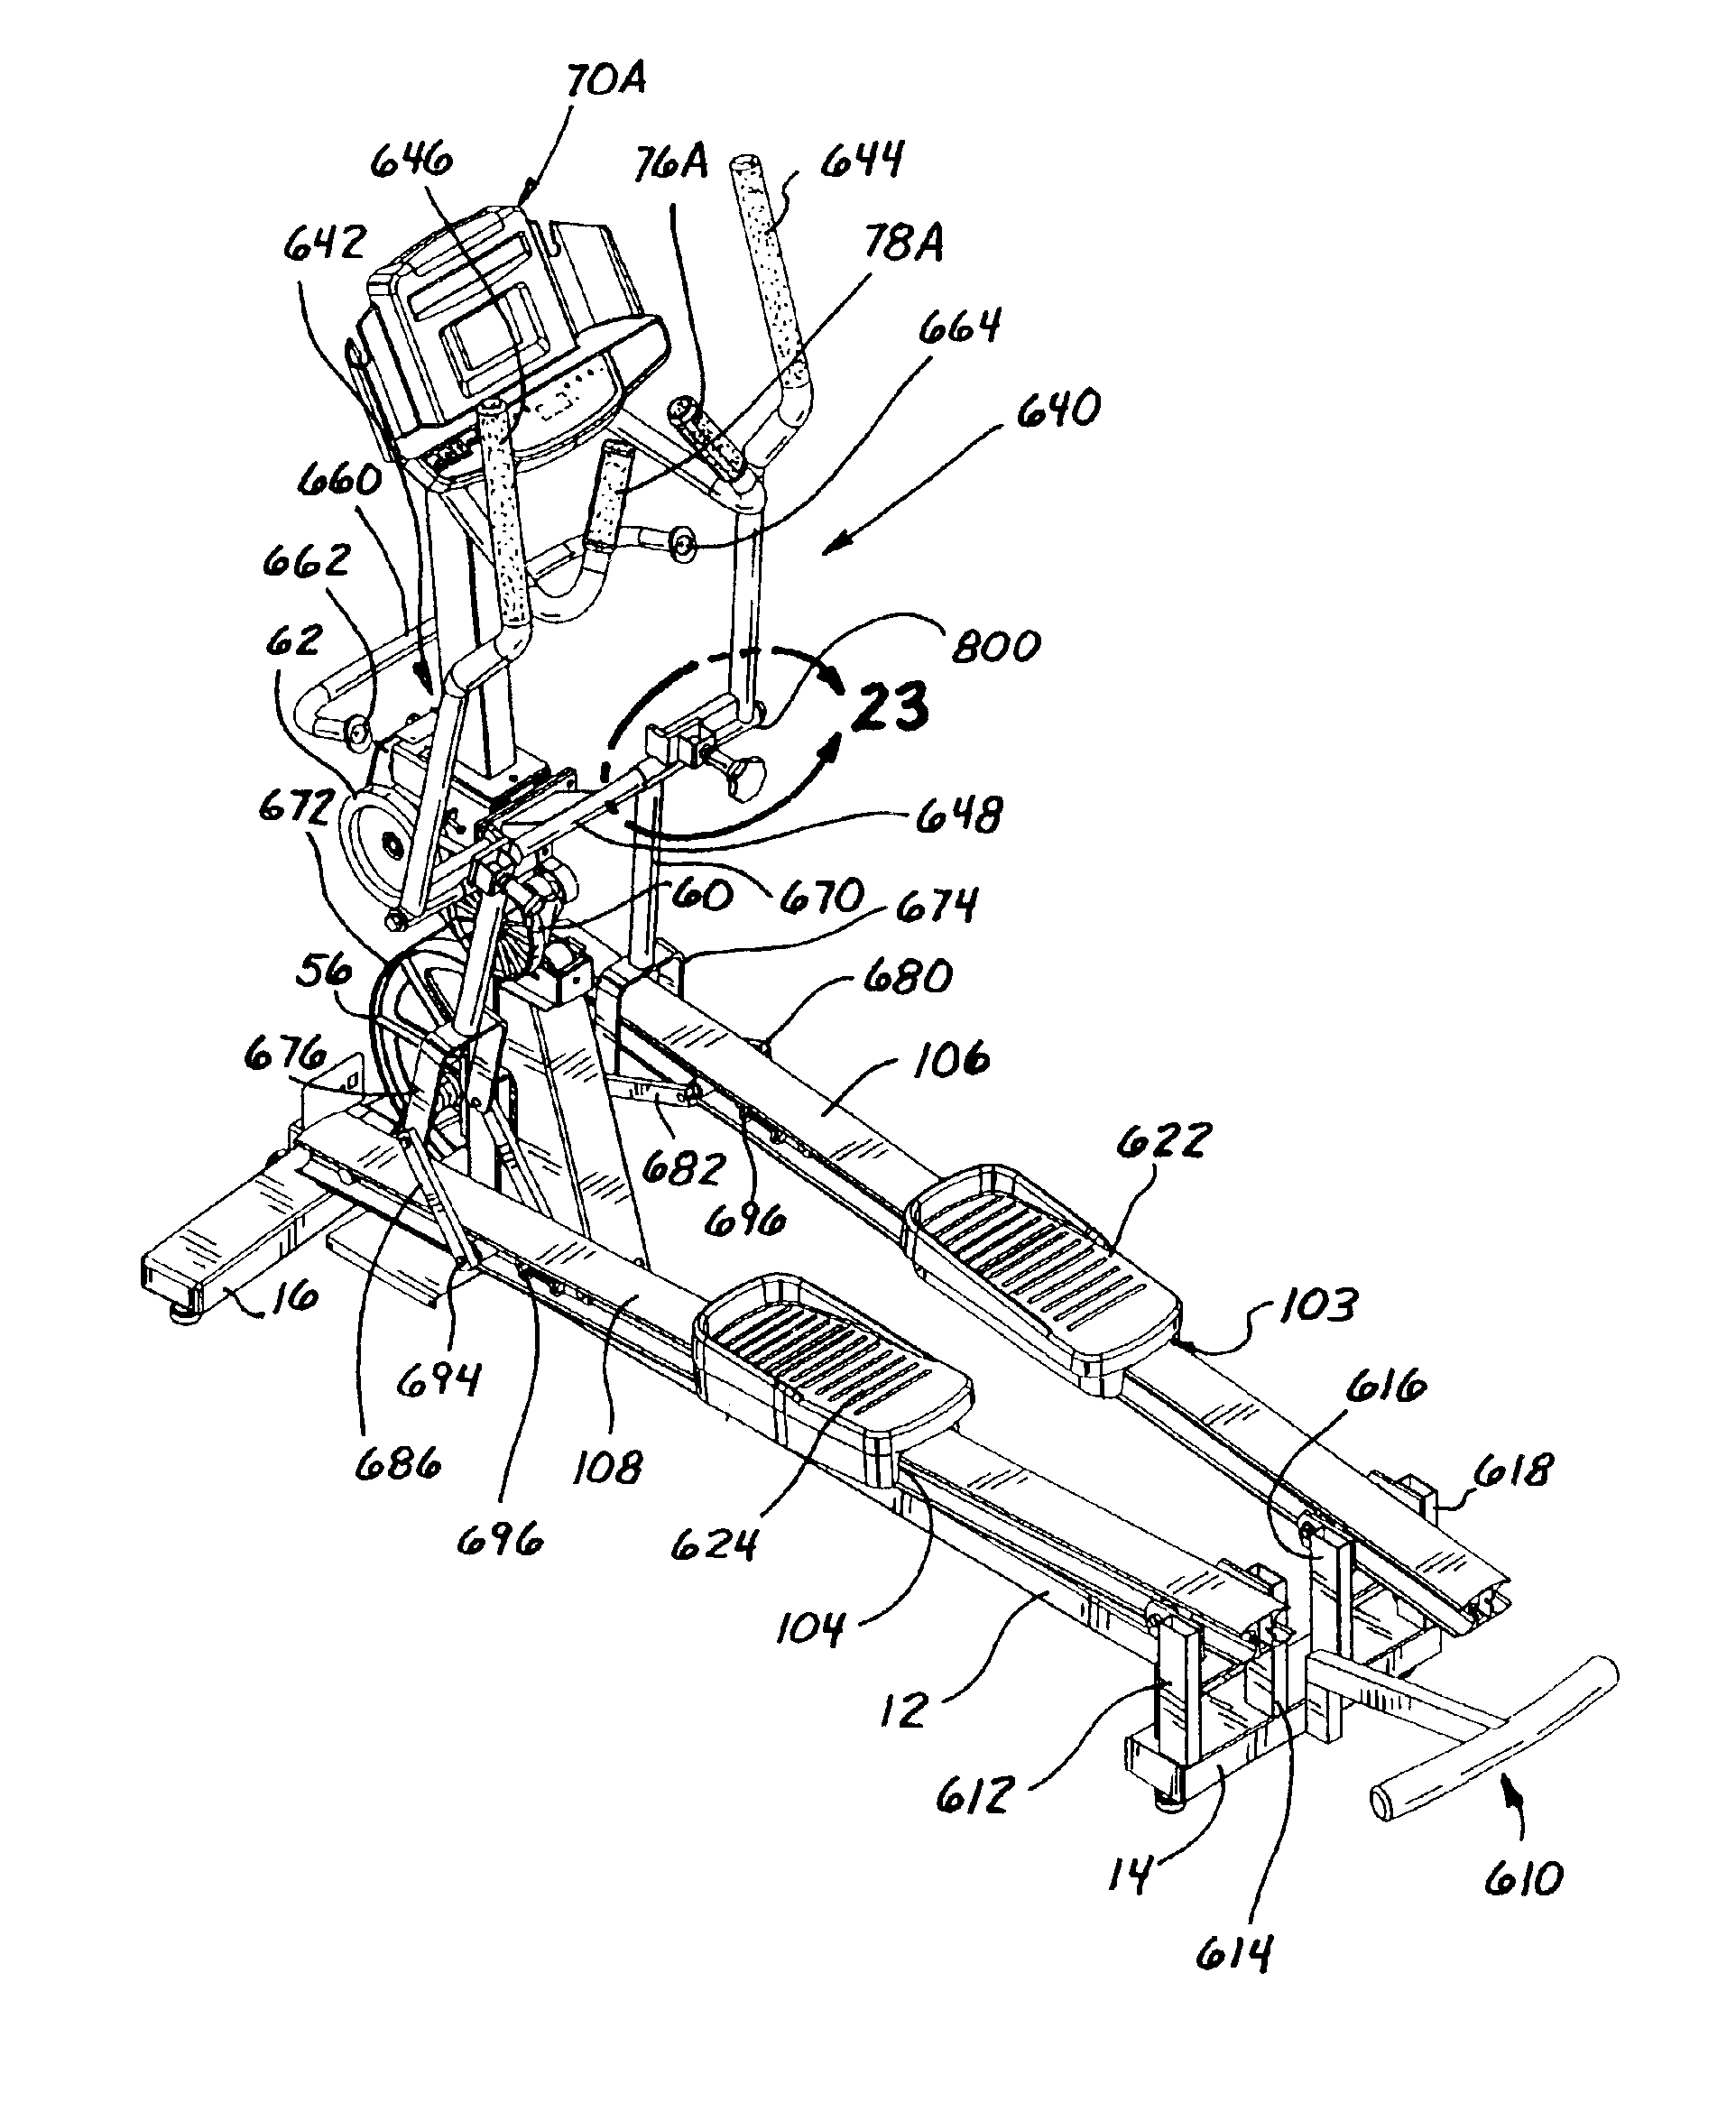 Elliptical exercise device and arm linkage